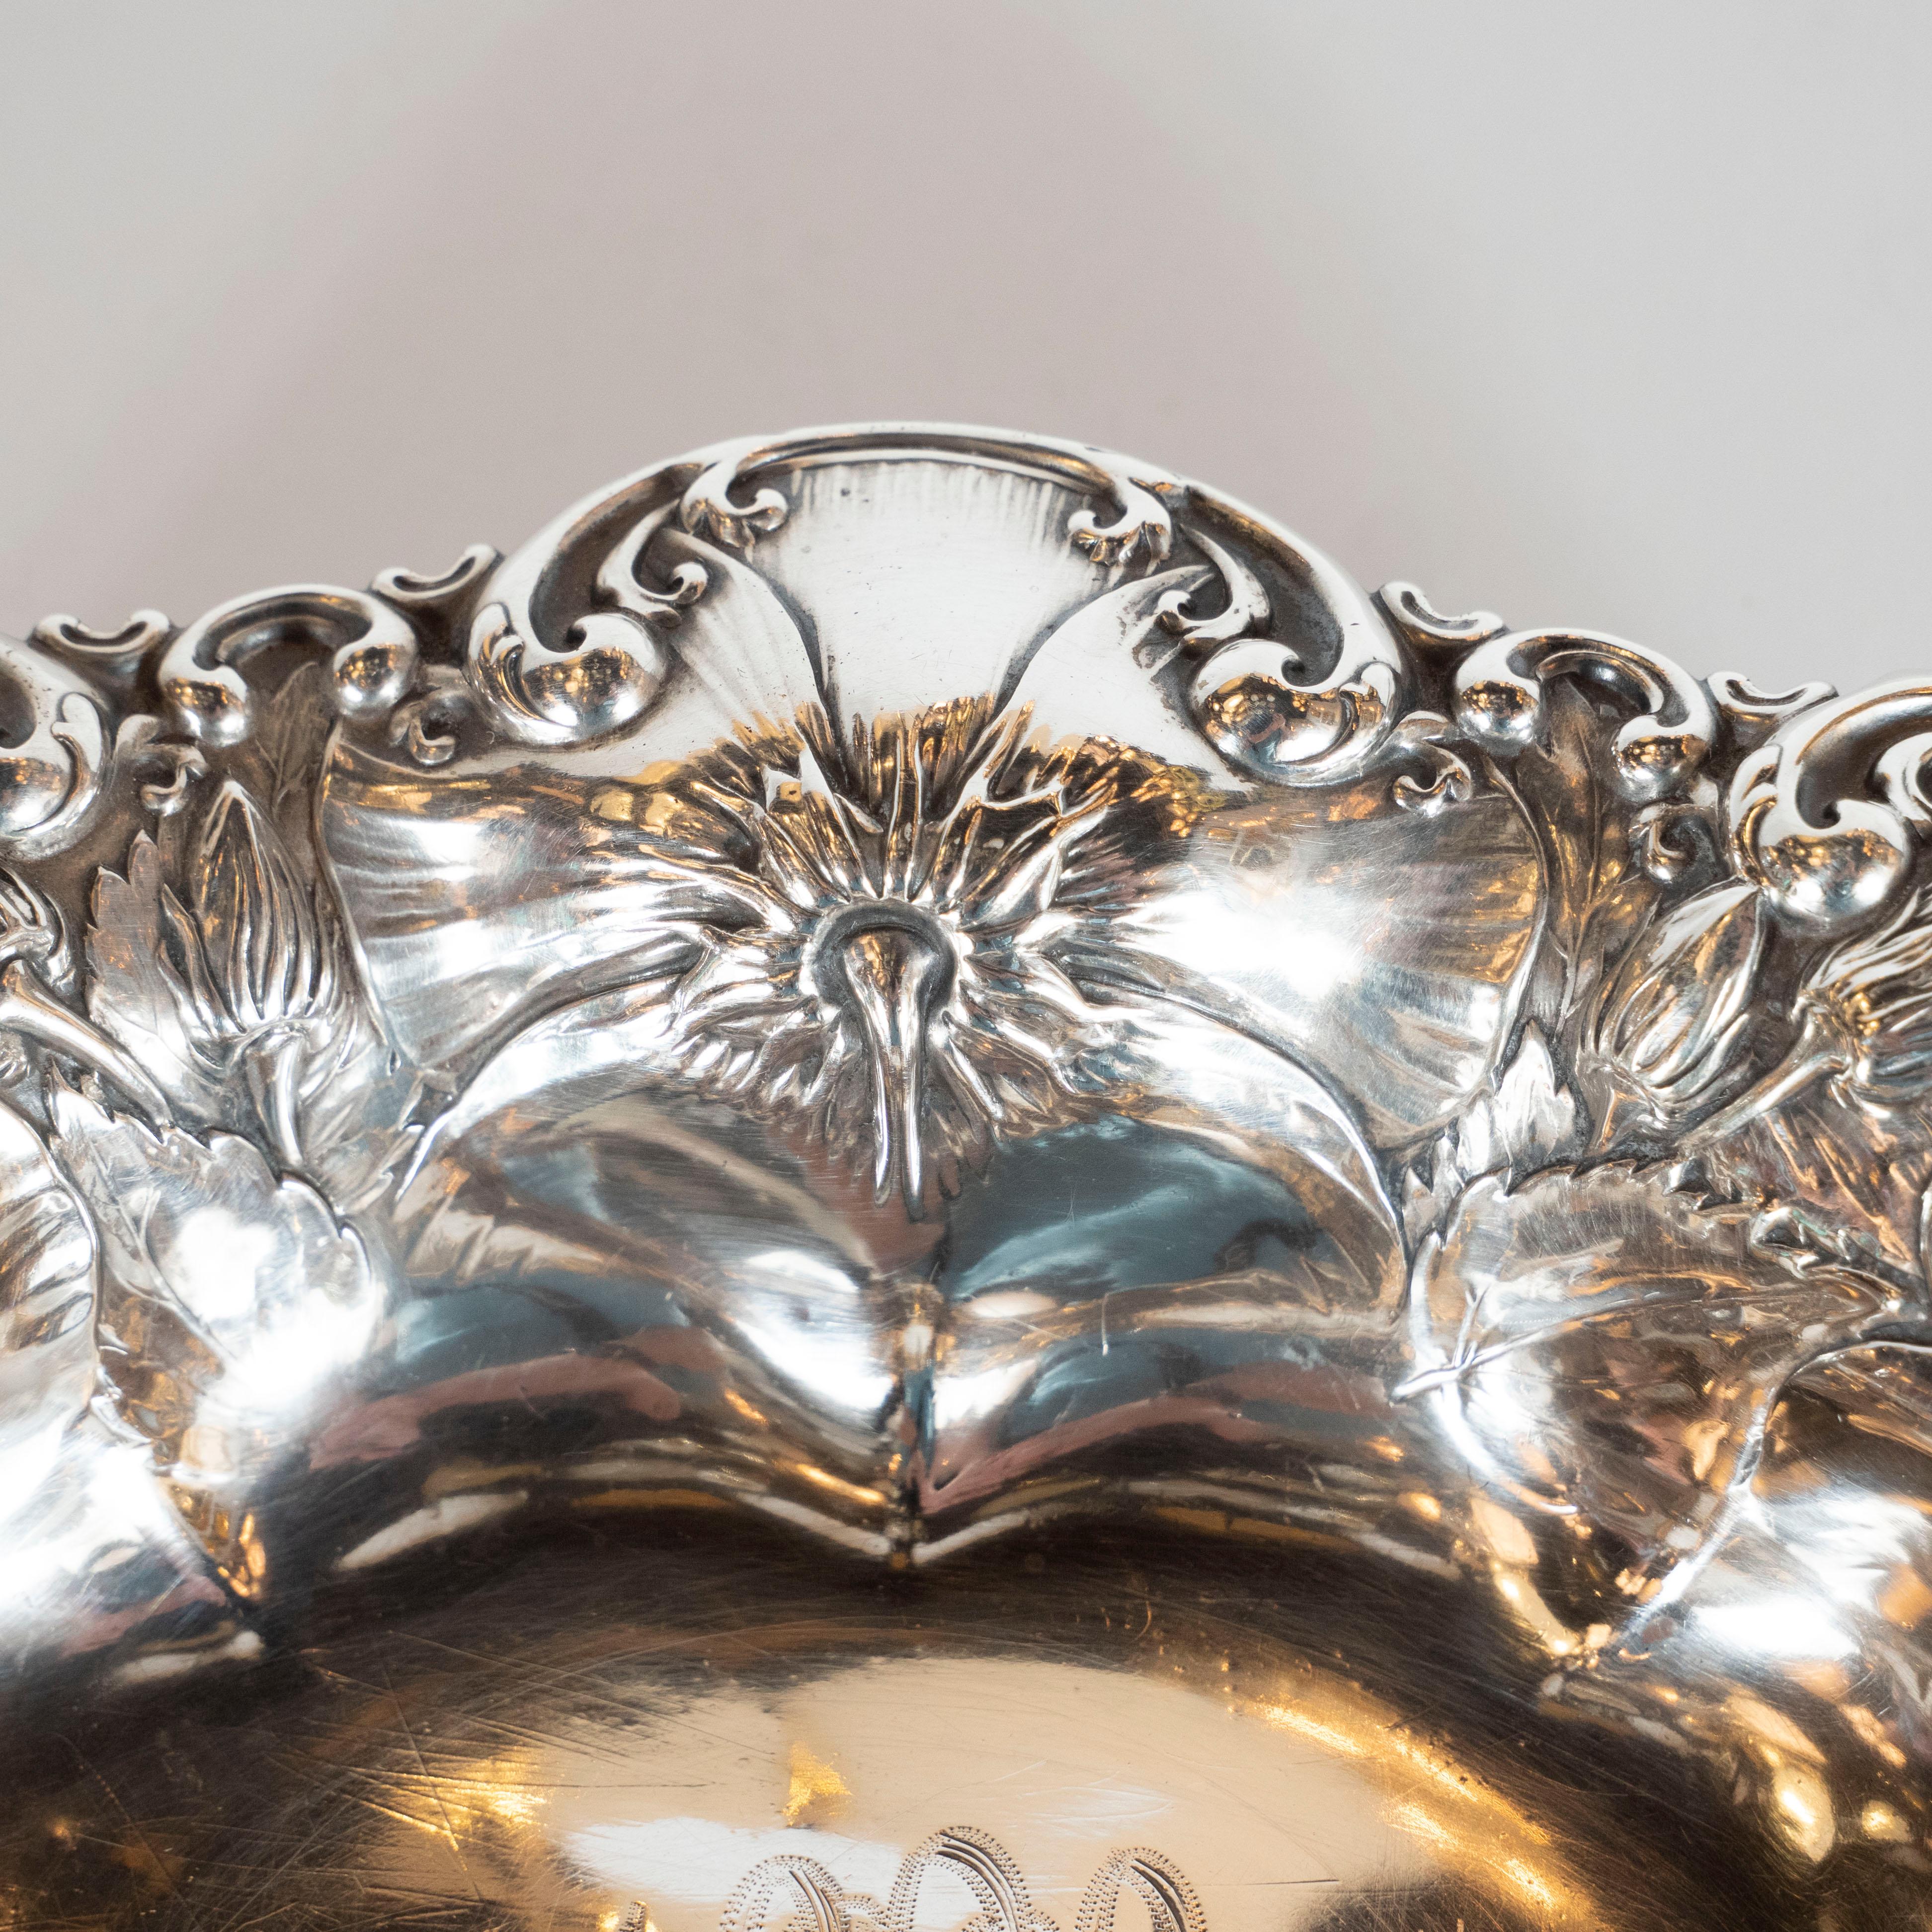 Antique Sterling Silver Art Nouveau Decorative Bowl with Morning Glory Motif In Excellent Condition For Sale In New York, NY